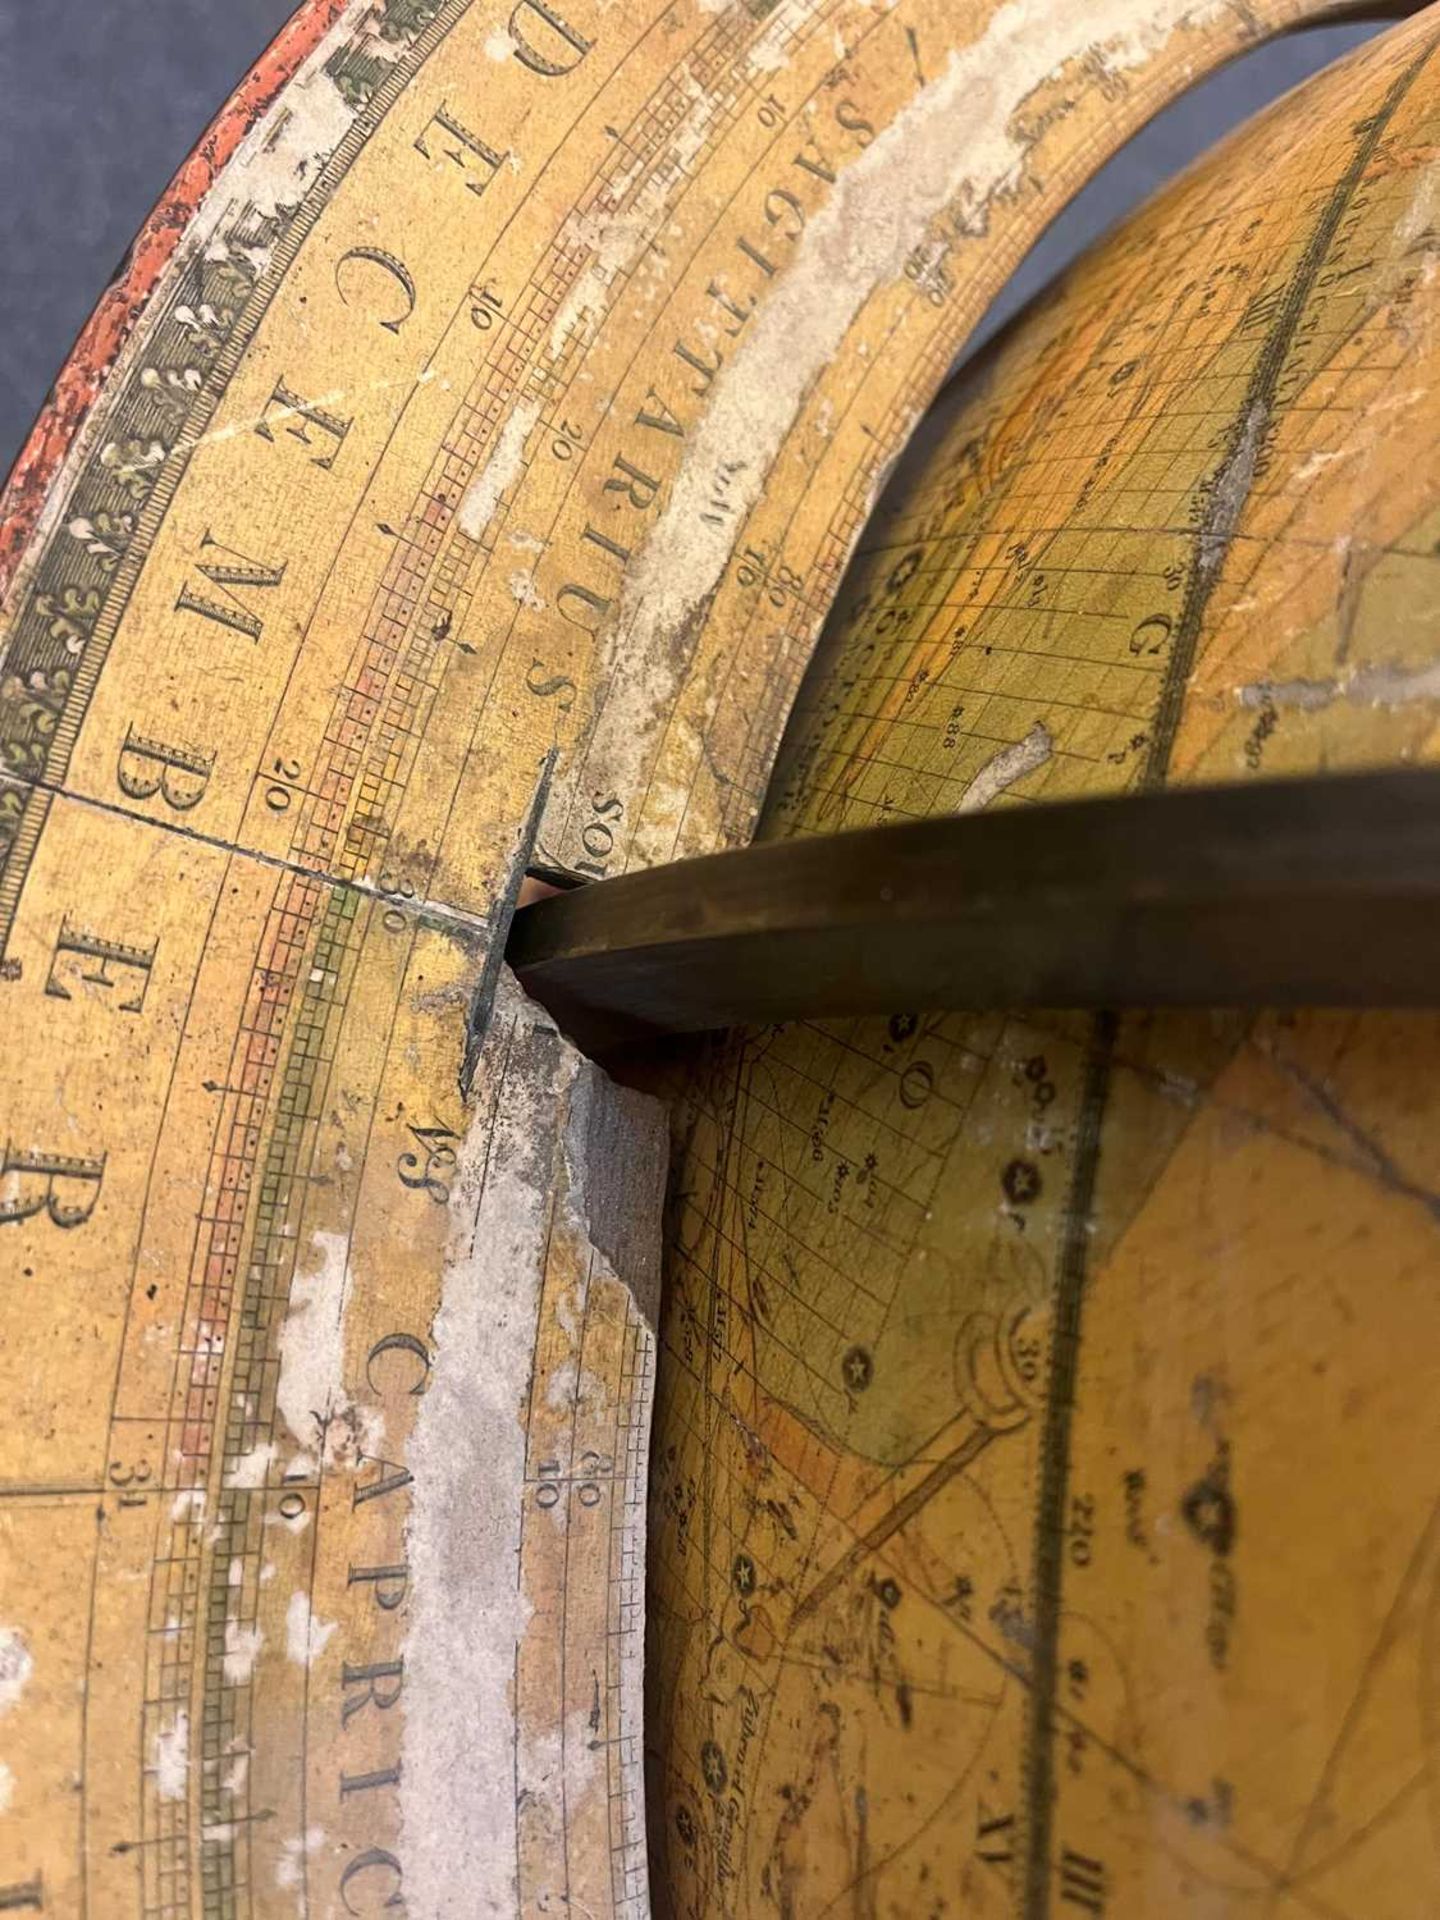 A large celestial library globe by J & W Cary, - Image 39 of 84